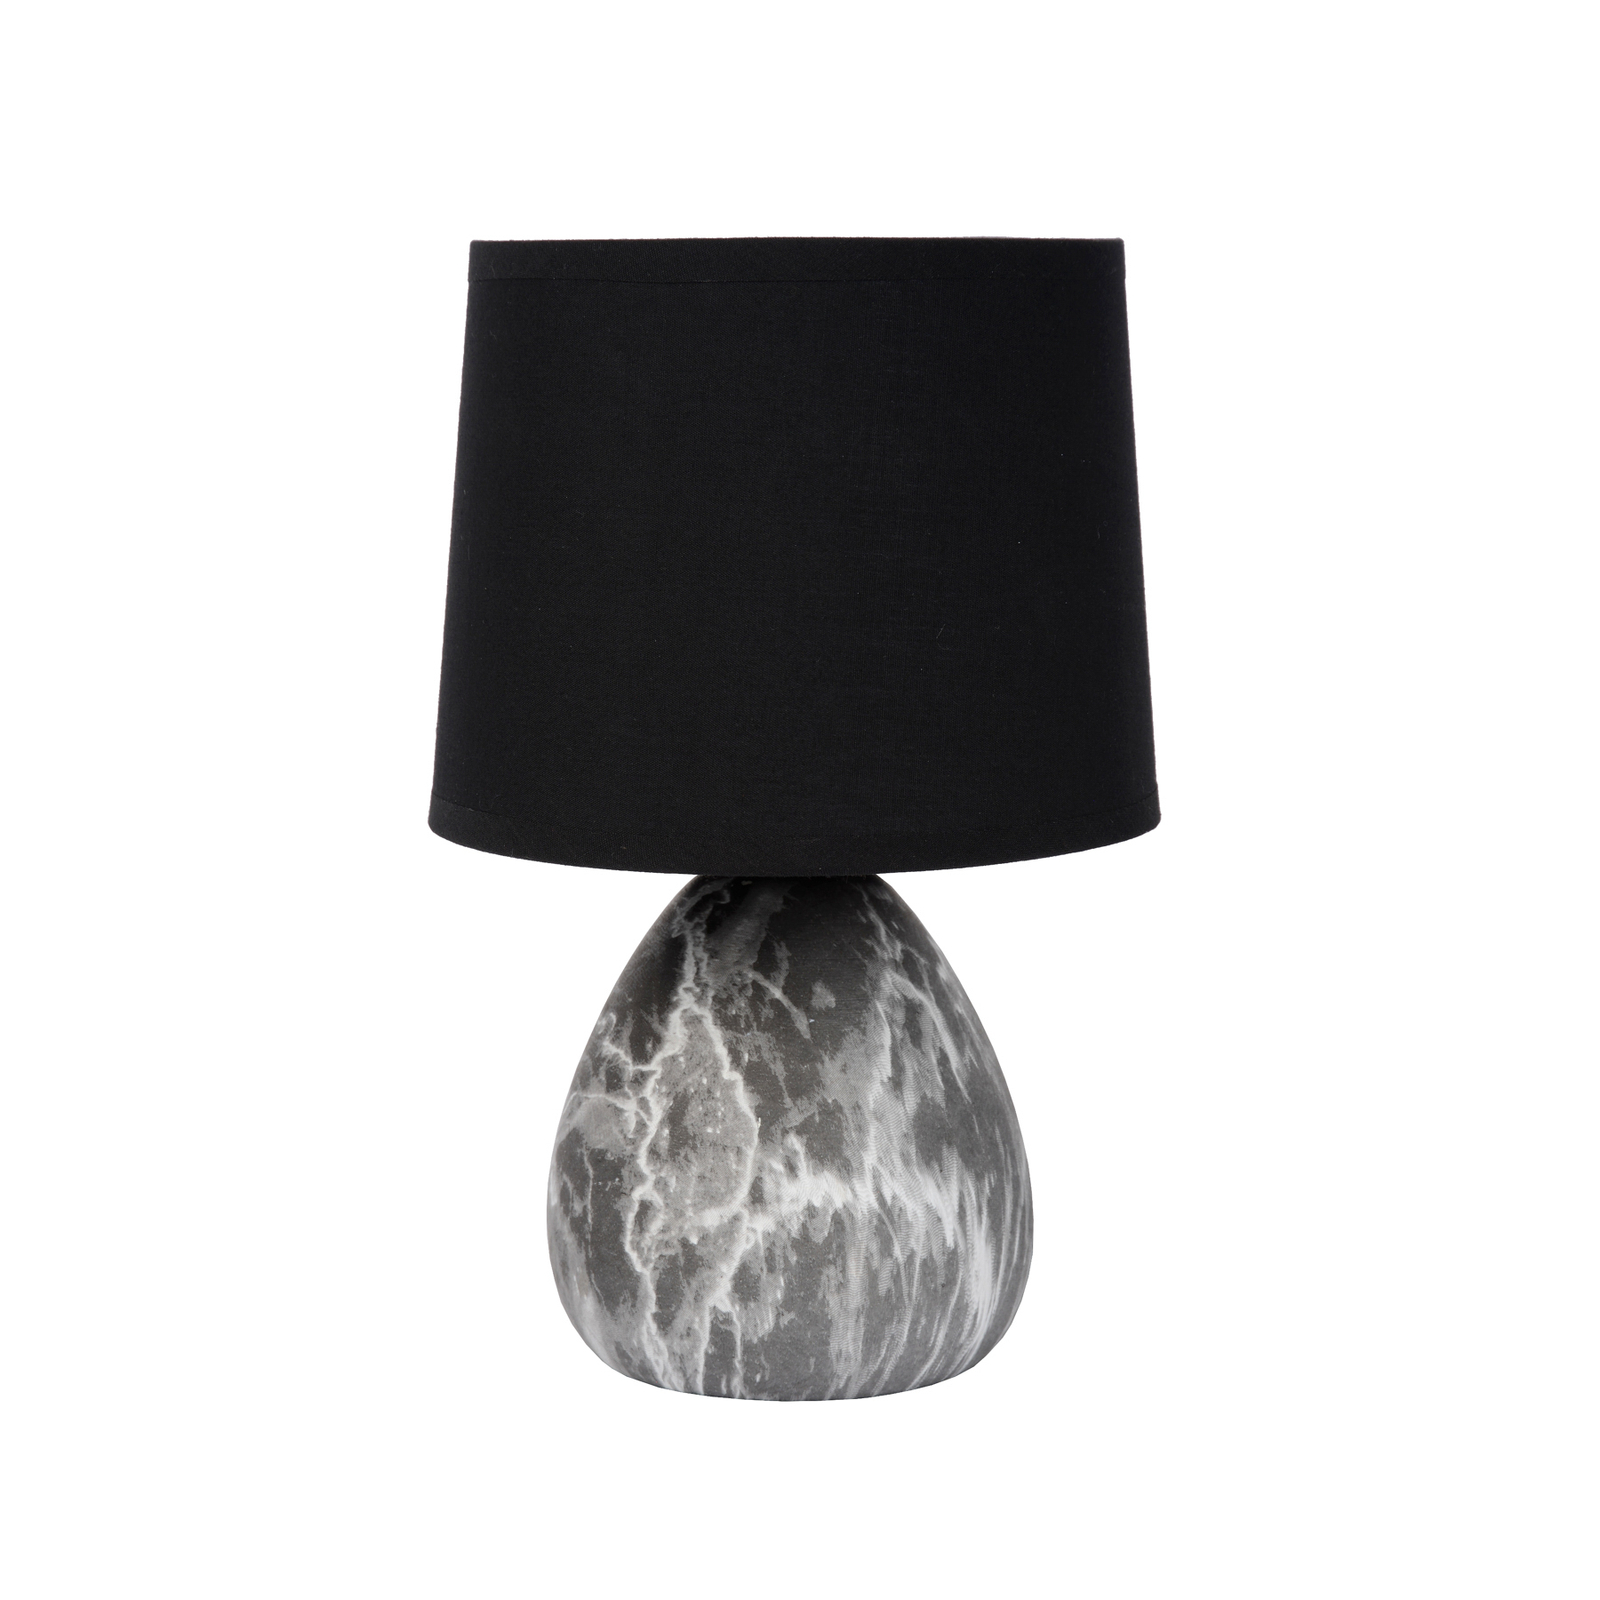 Marmo table lamp with a ceramic base, black